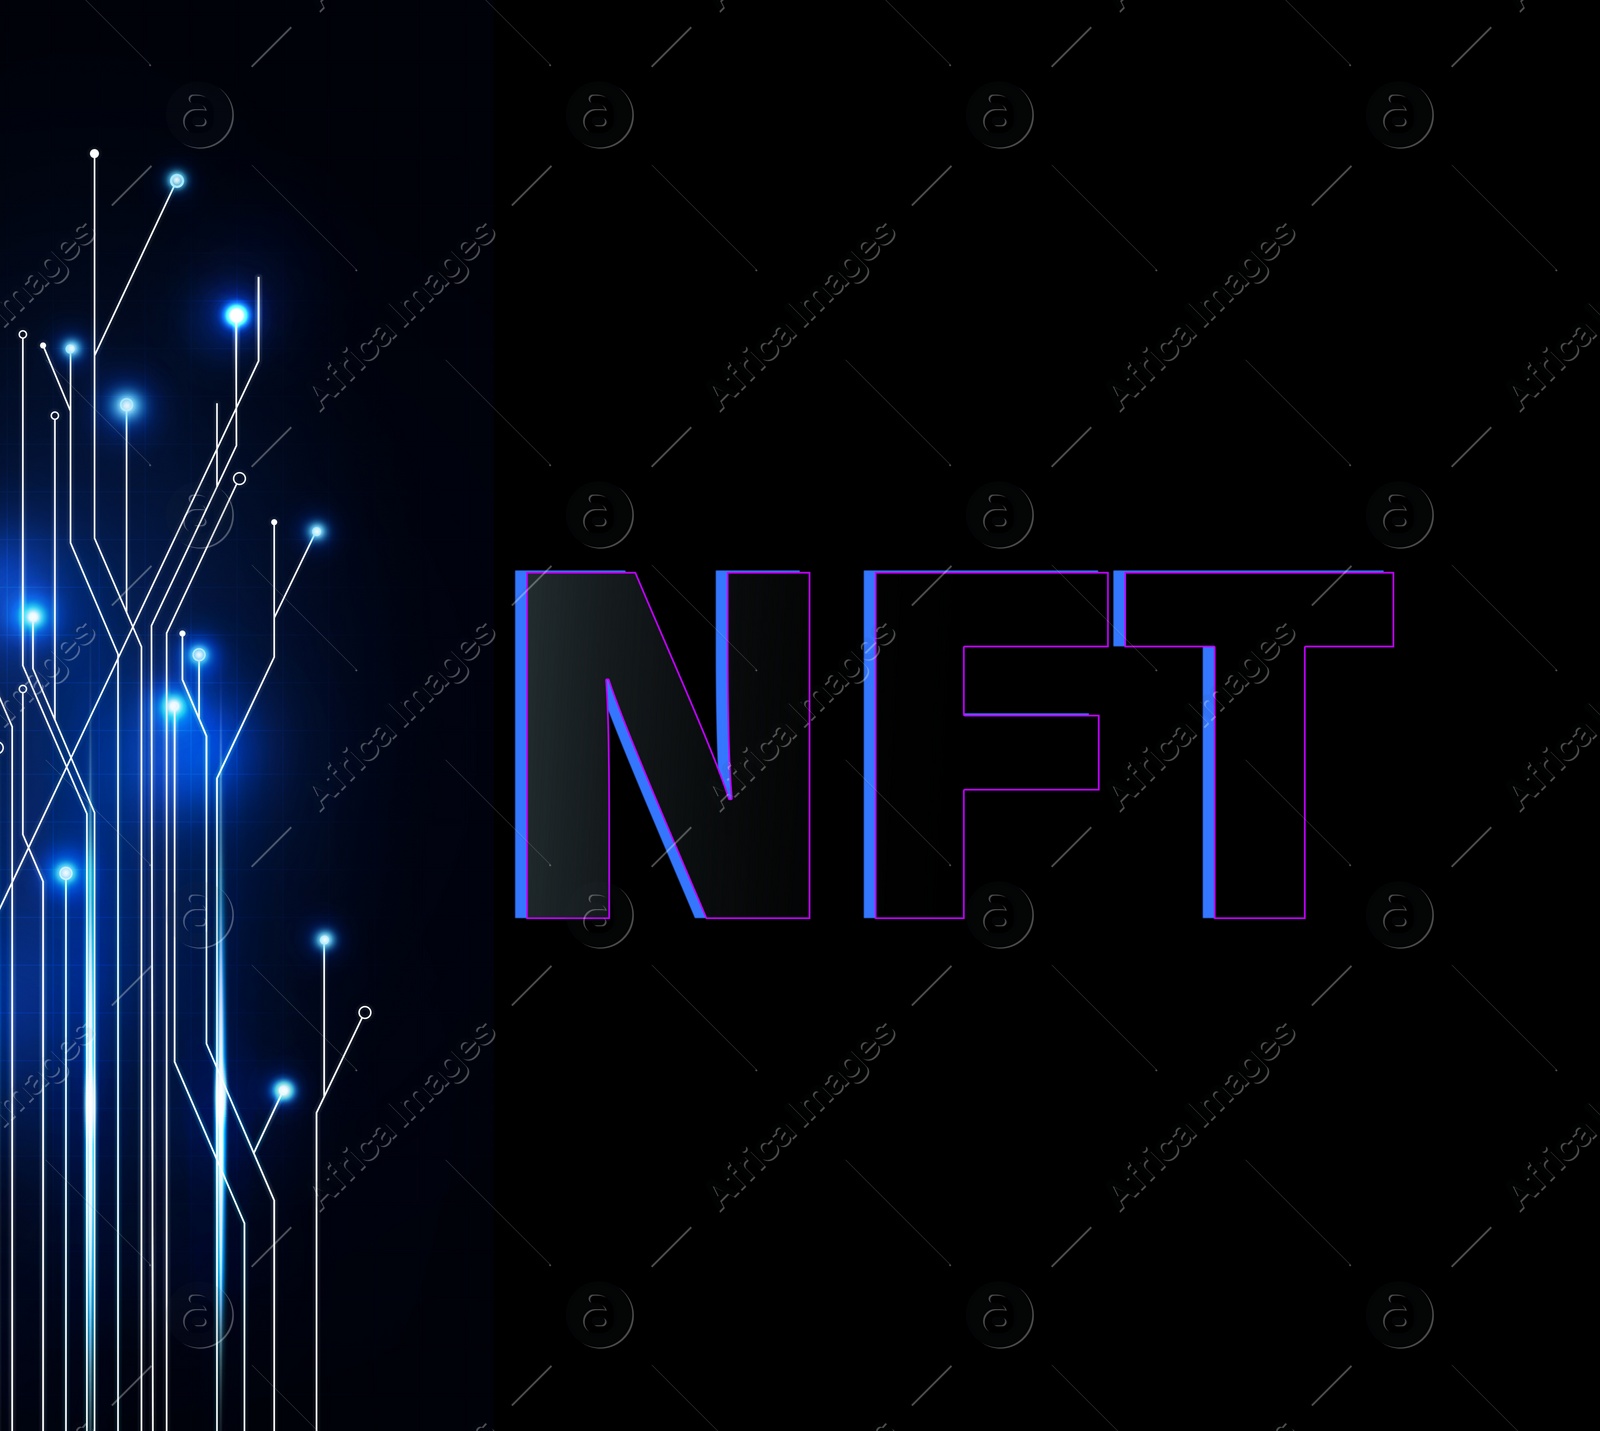 Image of Abbreviation NFT (non-fungible token) and circuit board pattern illustration